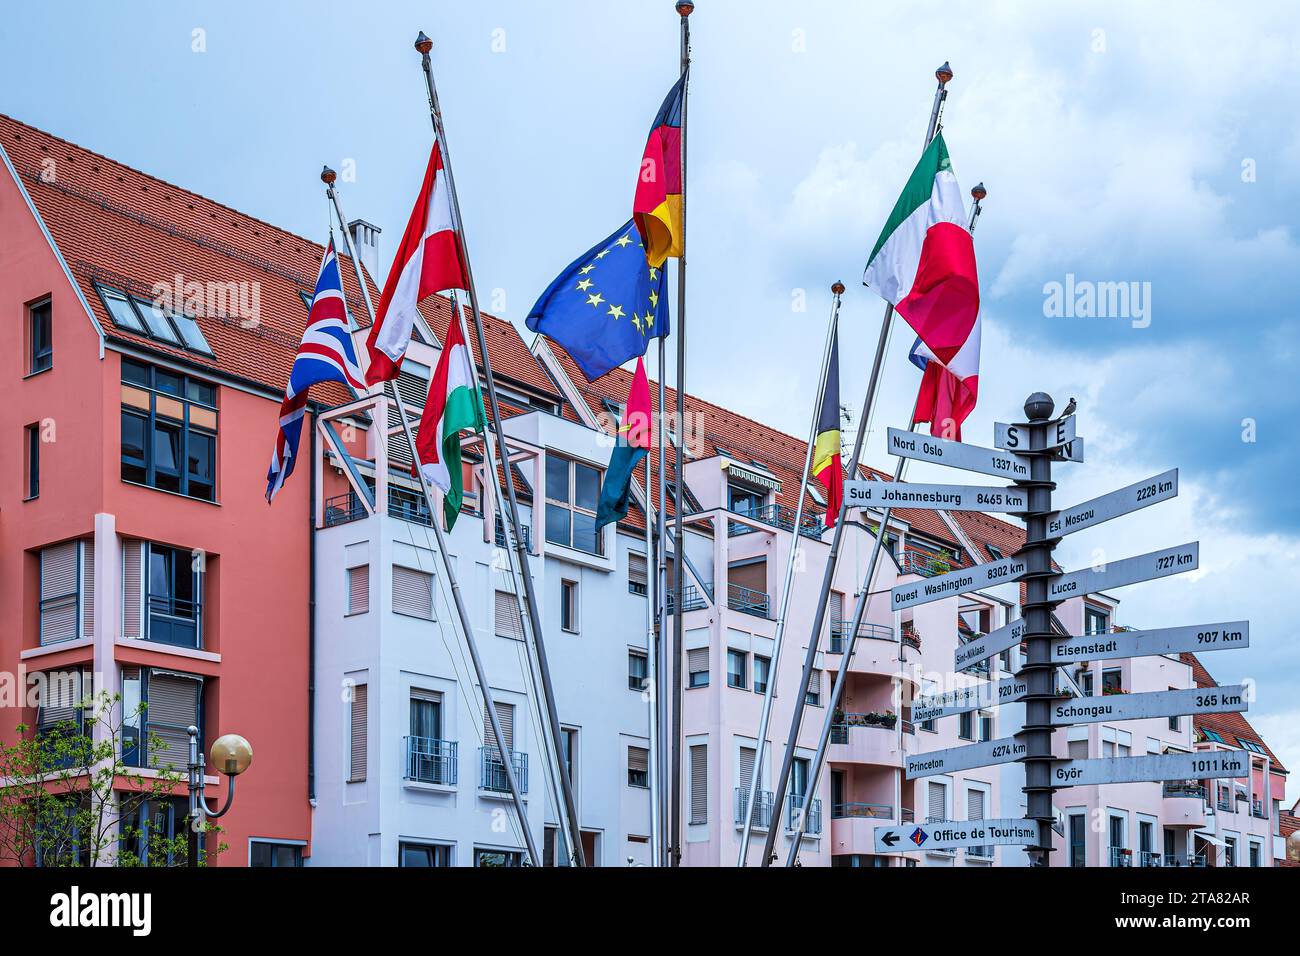 COLMAR, ALSACE, FRANCE - MAY 5, 2023: Flags of several EU countries and a pole with tablets on which the main cities of the globe are inscribed, with Stock Photo